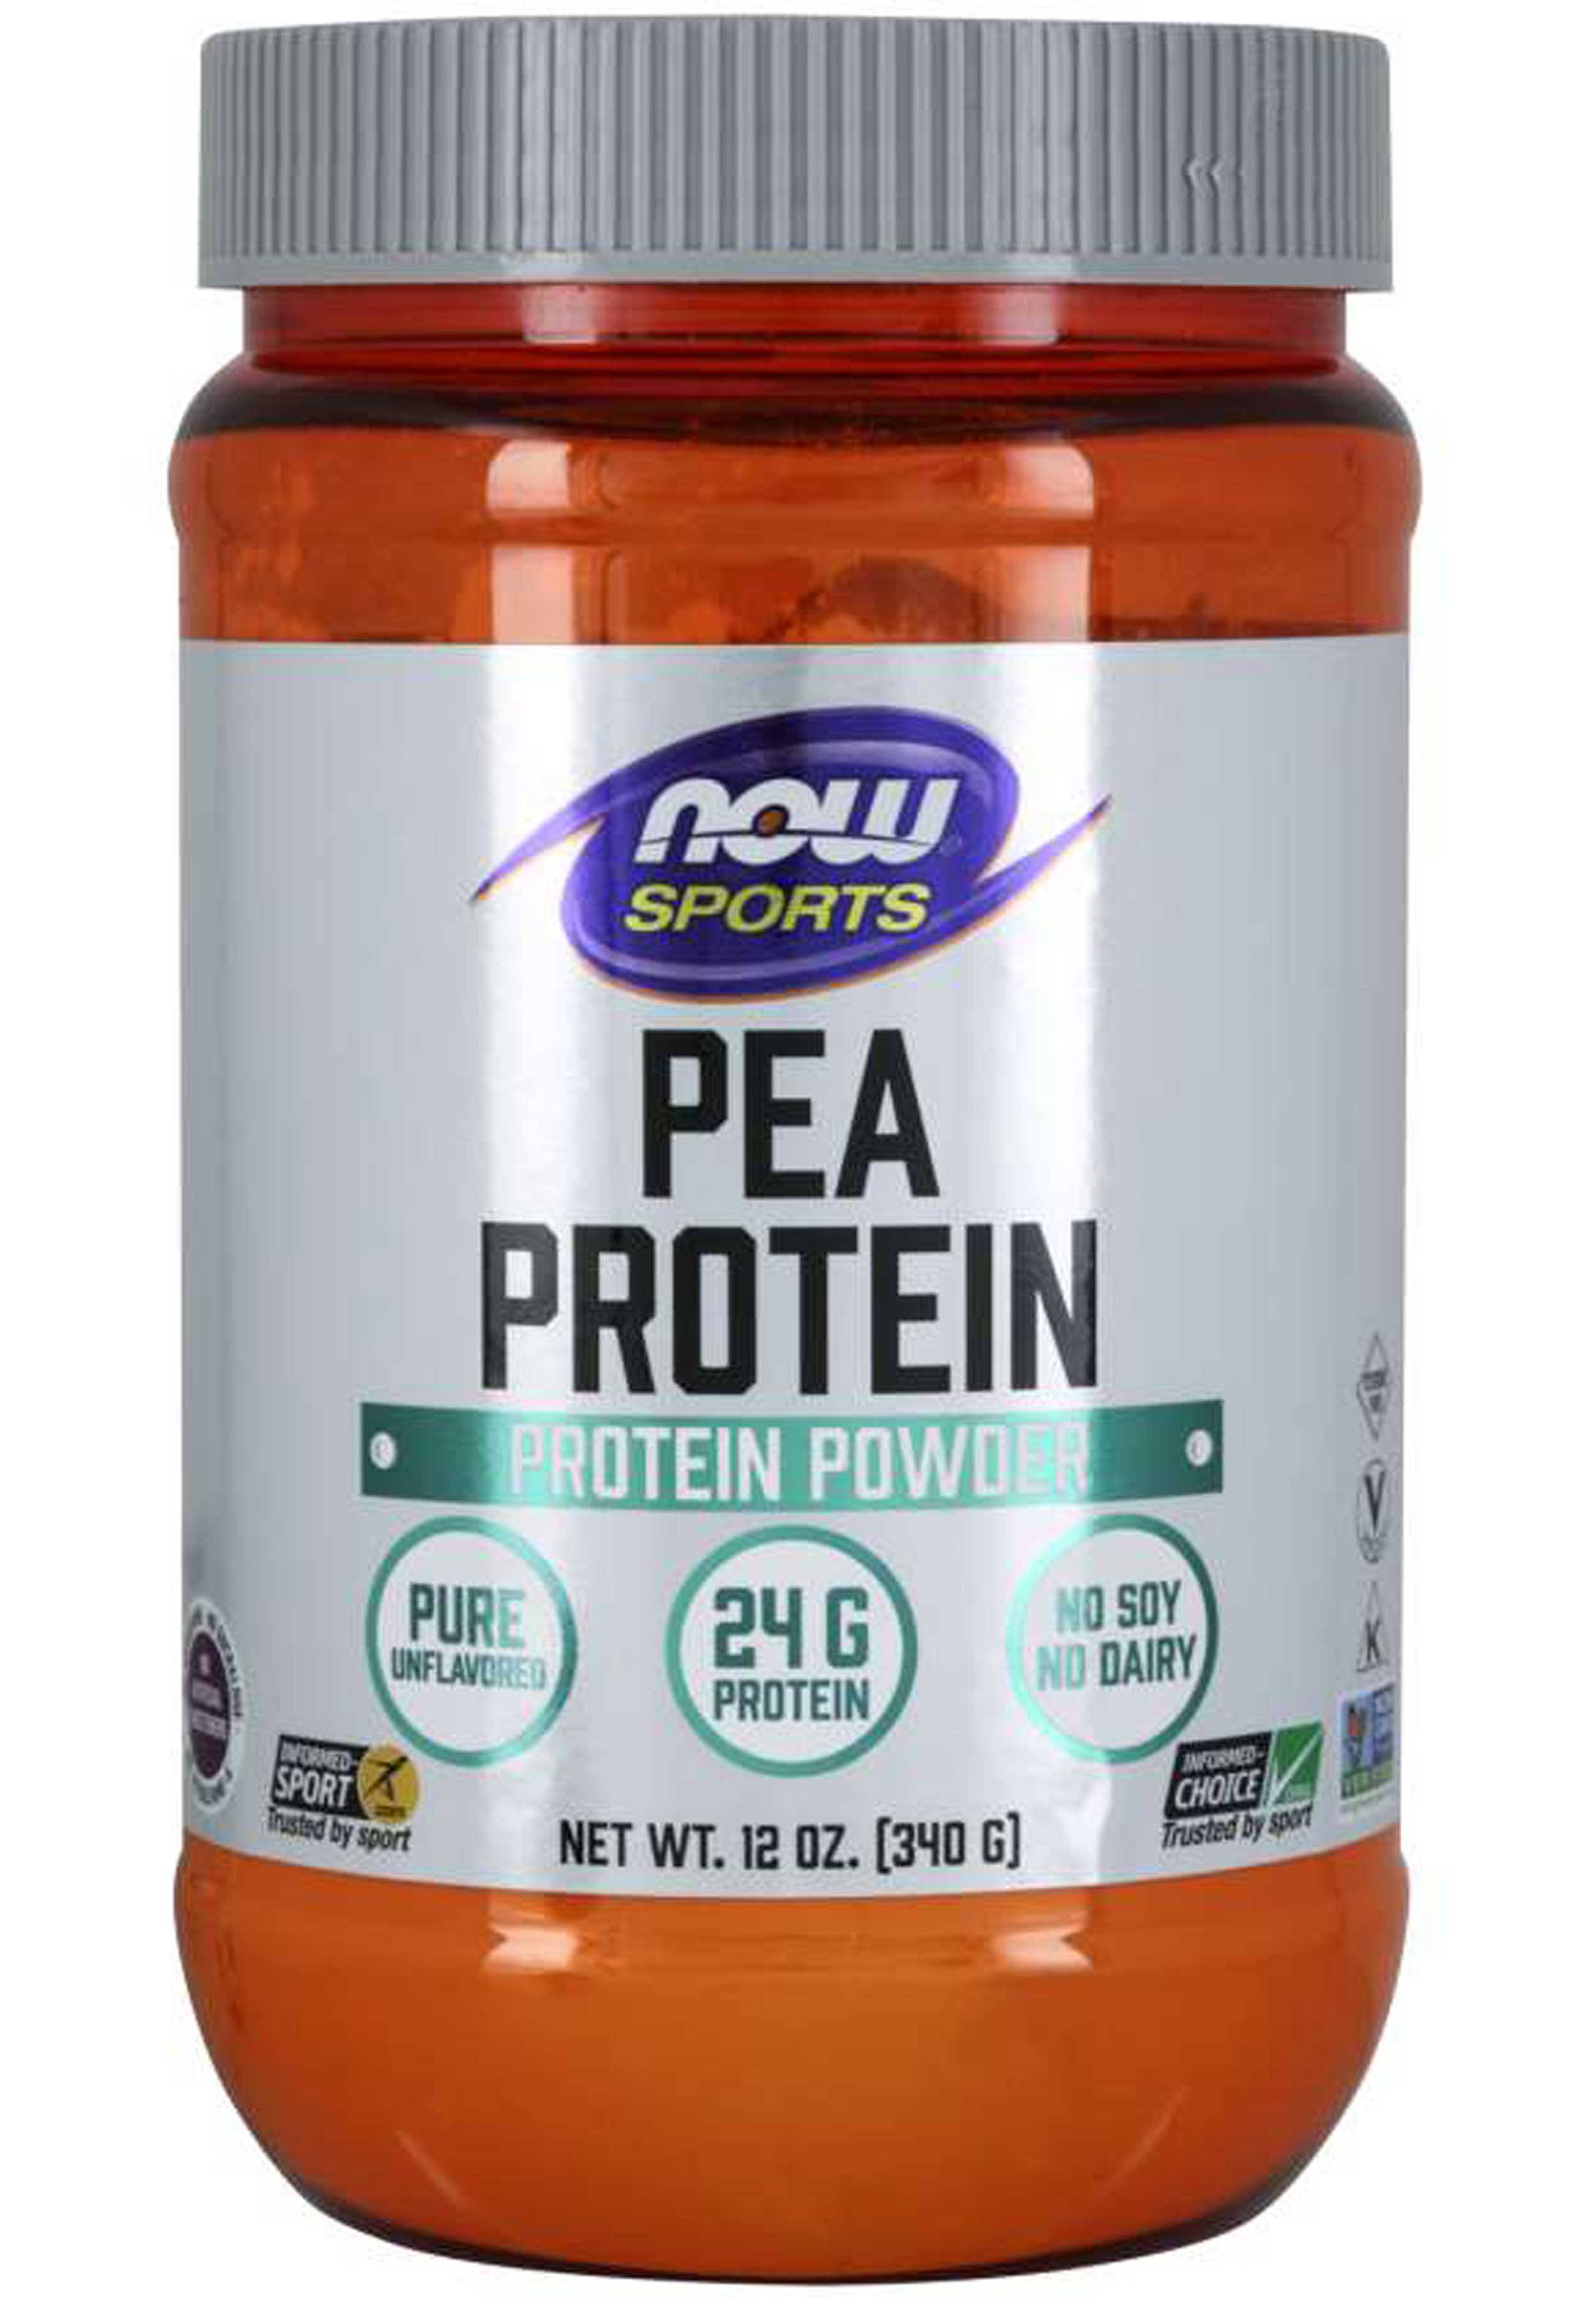 Now Foods Pea Protein - 340g, Unflavored